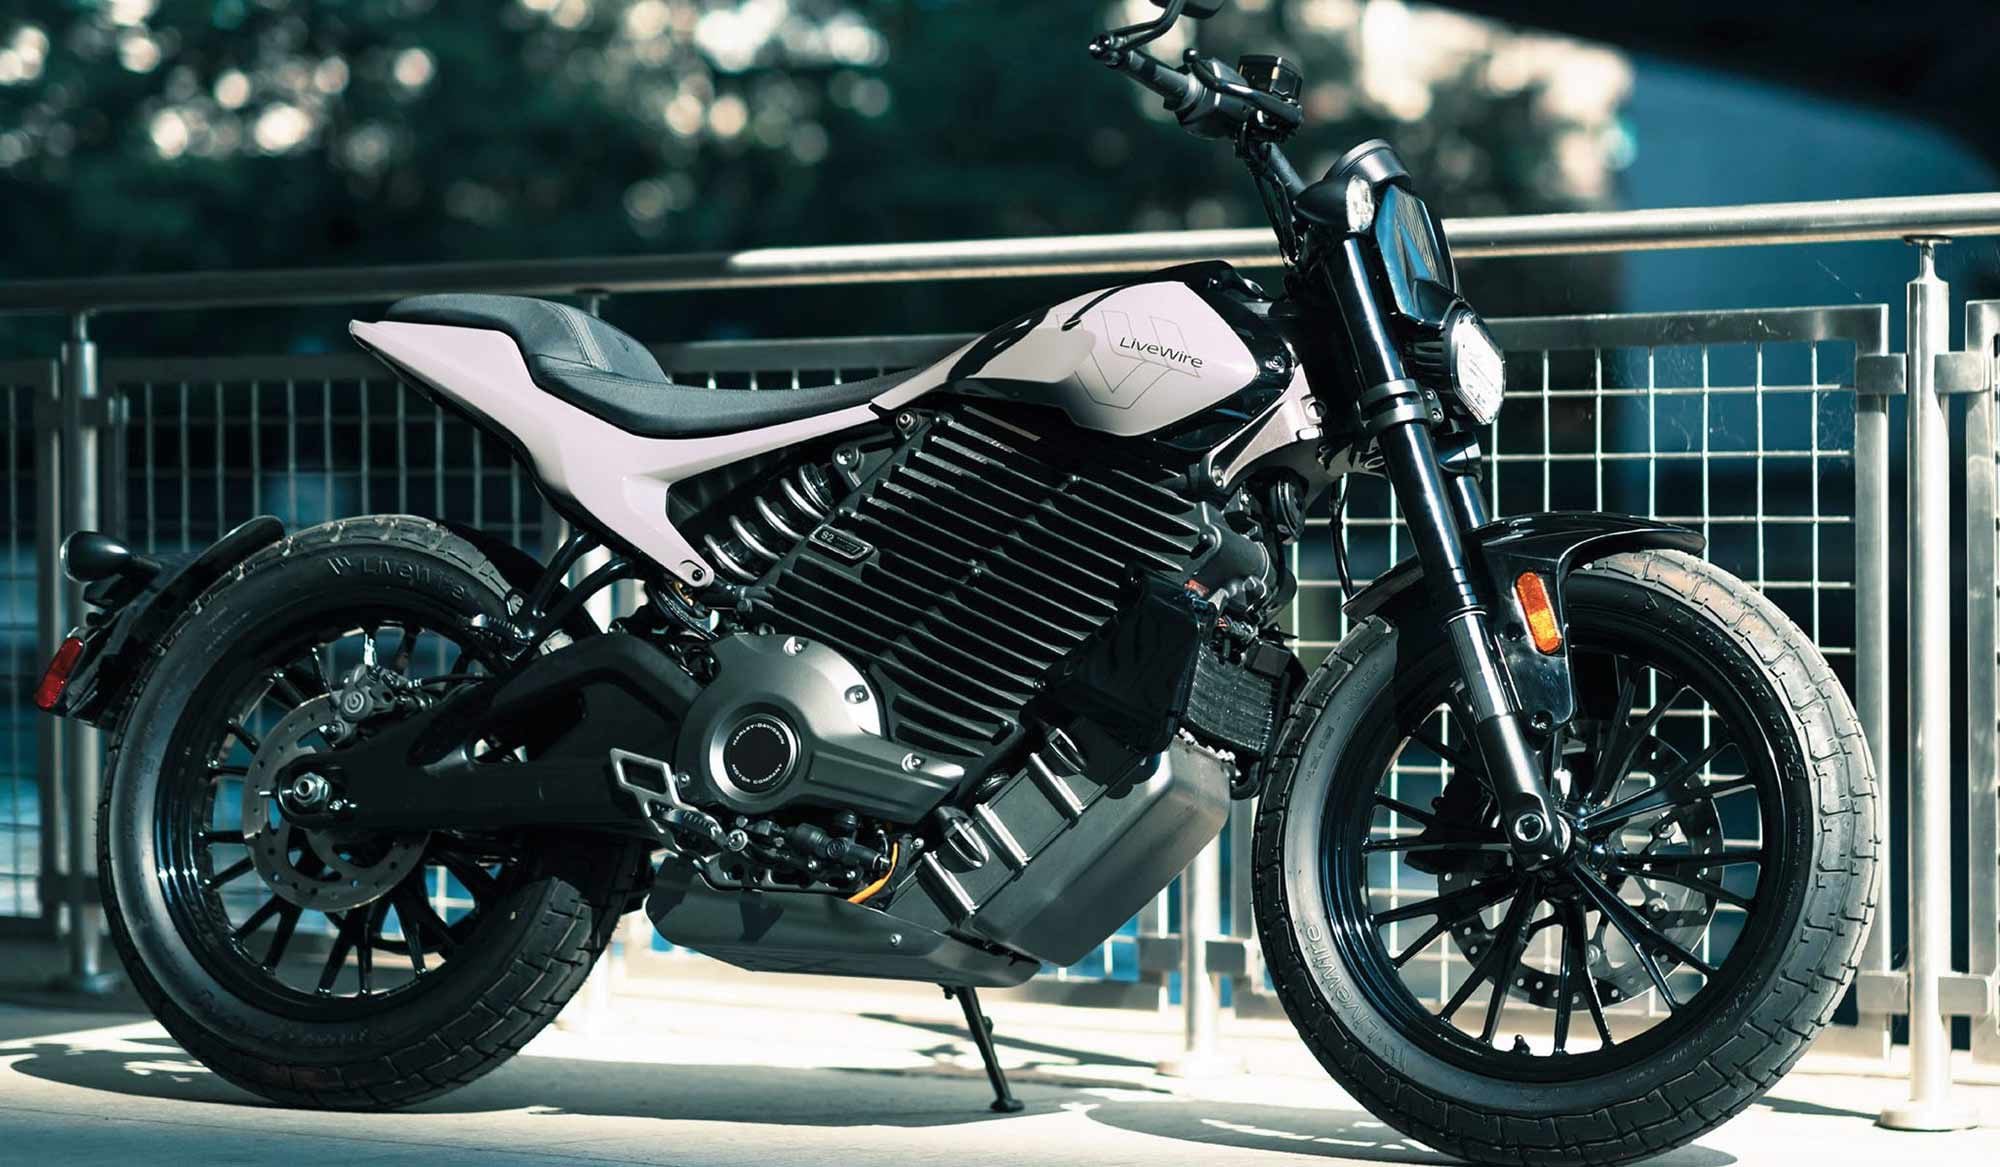 Harley has spun off LiveWire as a separate company. The firm’s first new model will be the production version of the S2 Del Mar, which we’re told is coming soon.